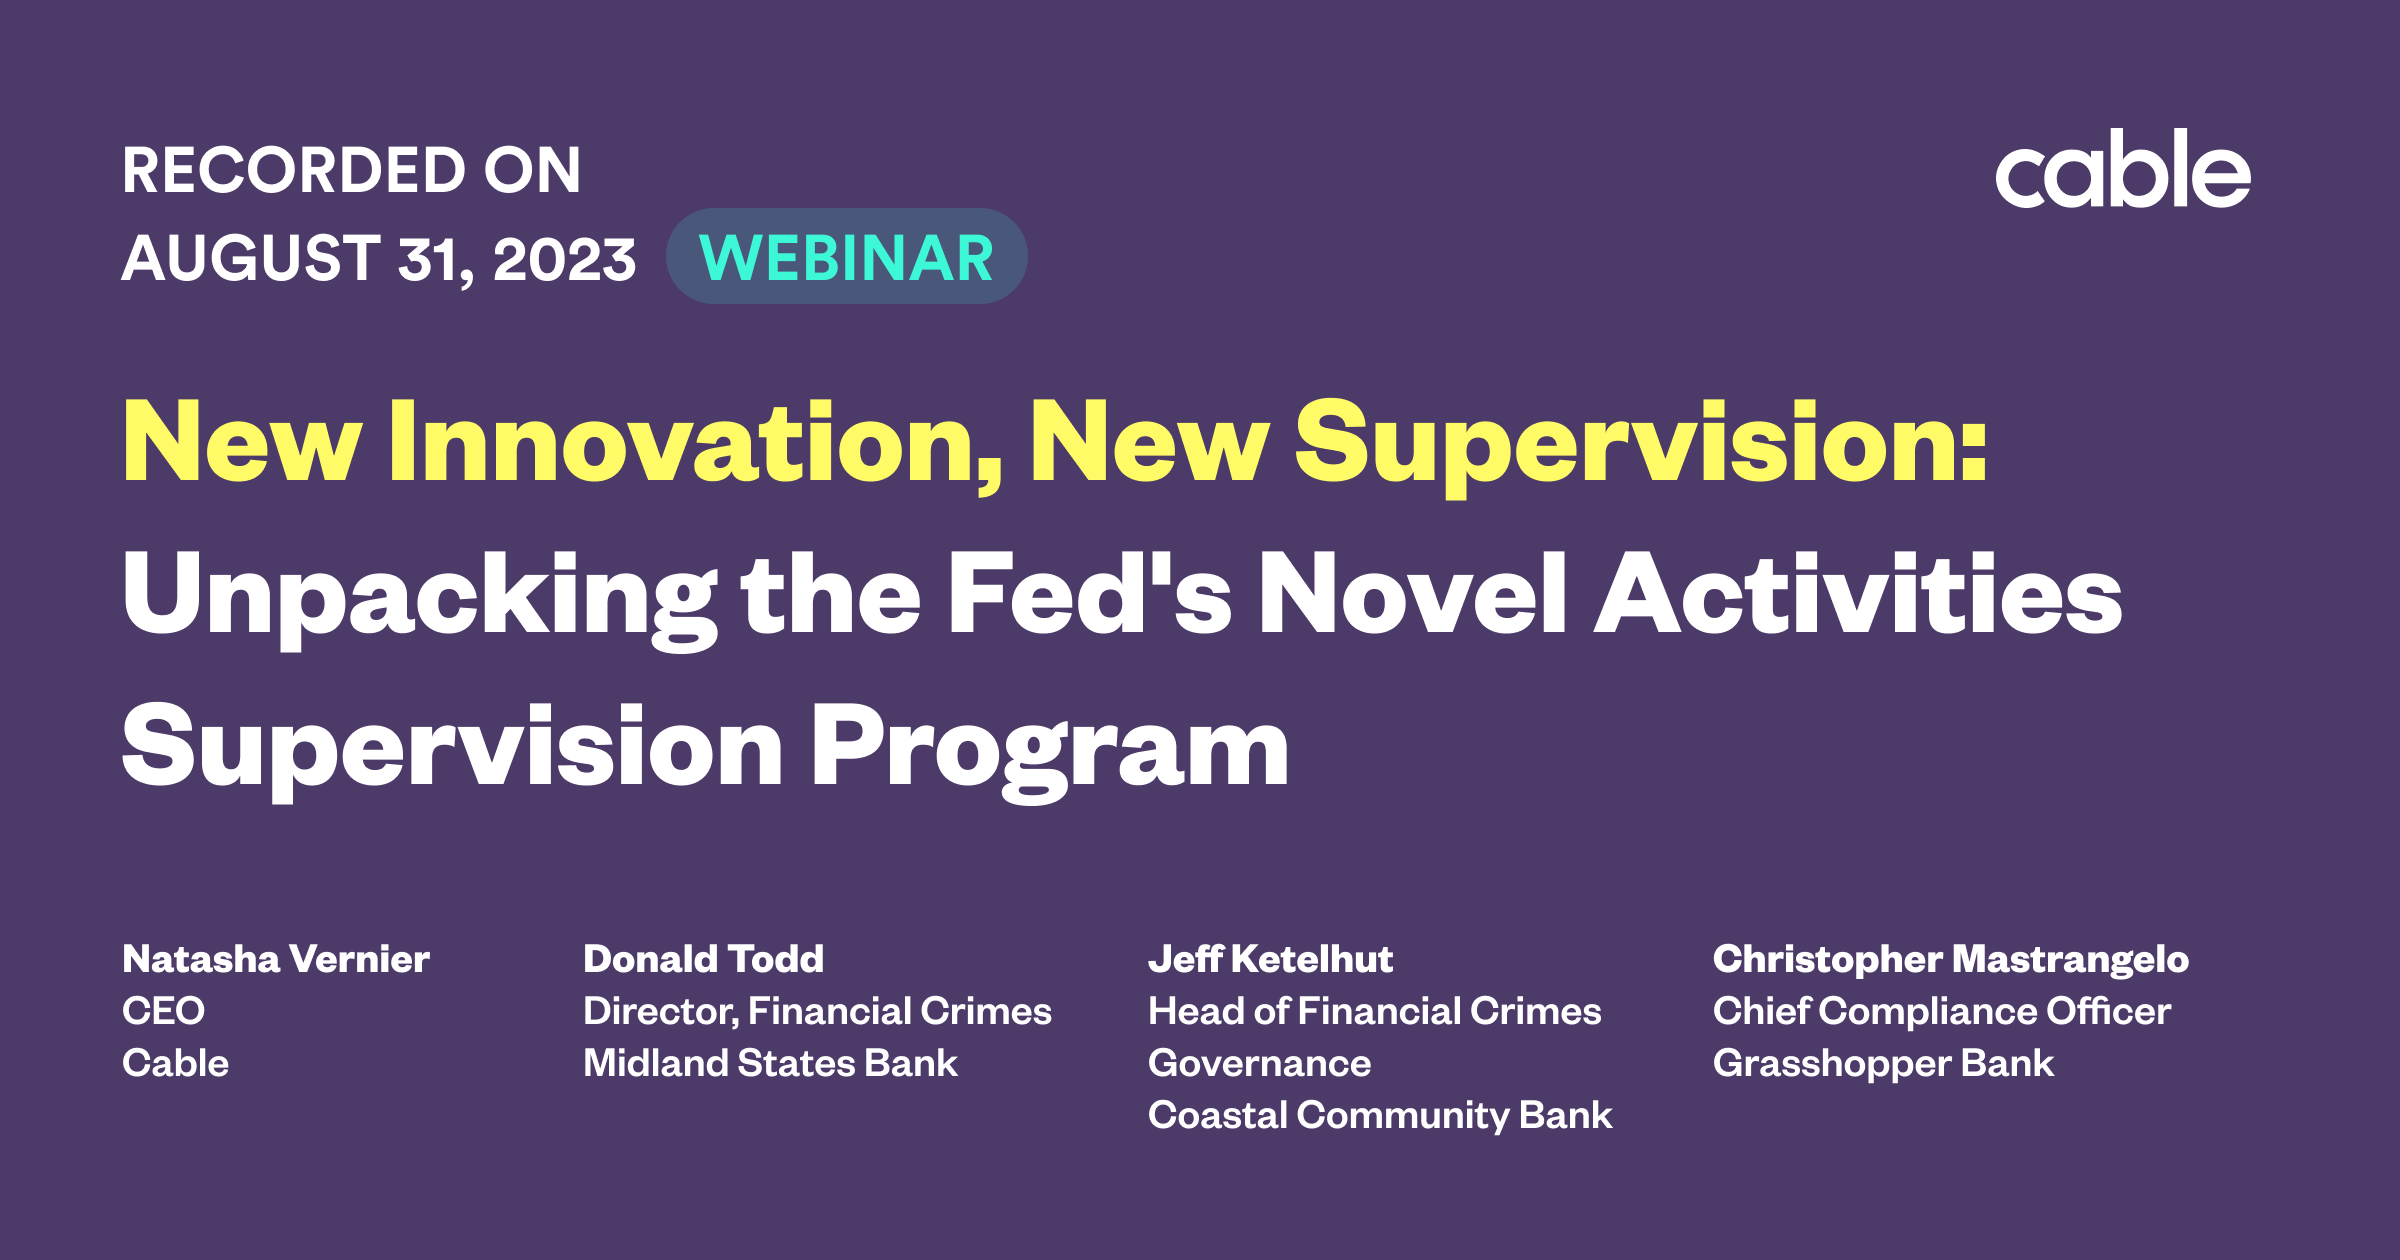 New Innovation, New Supervision: Unpacking the Fed's Novel Activities Supervision Program